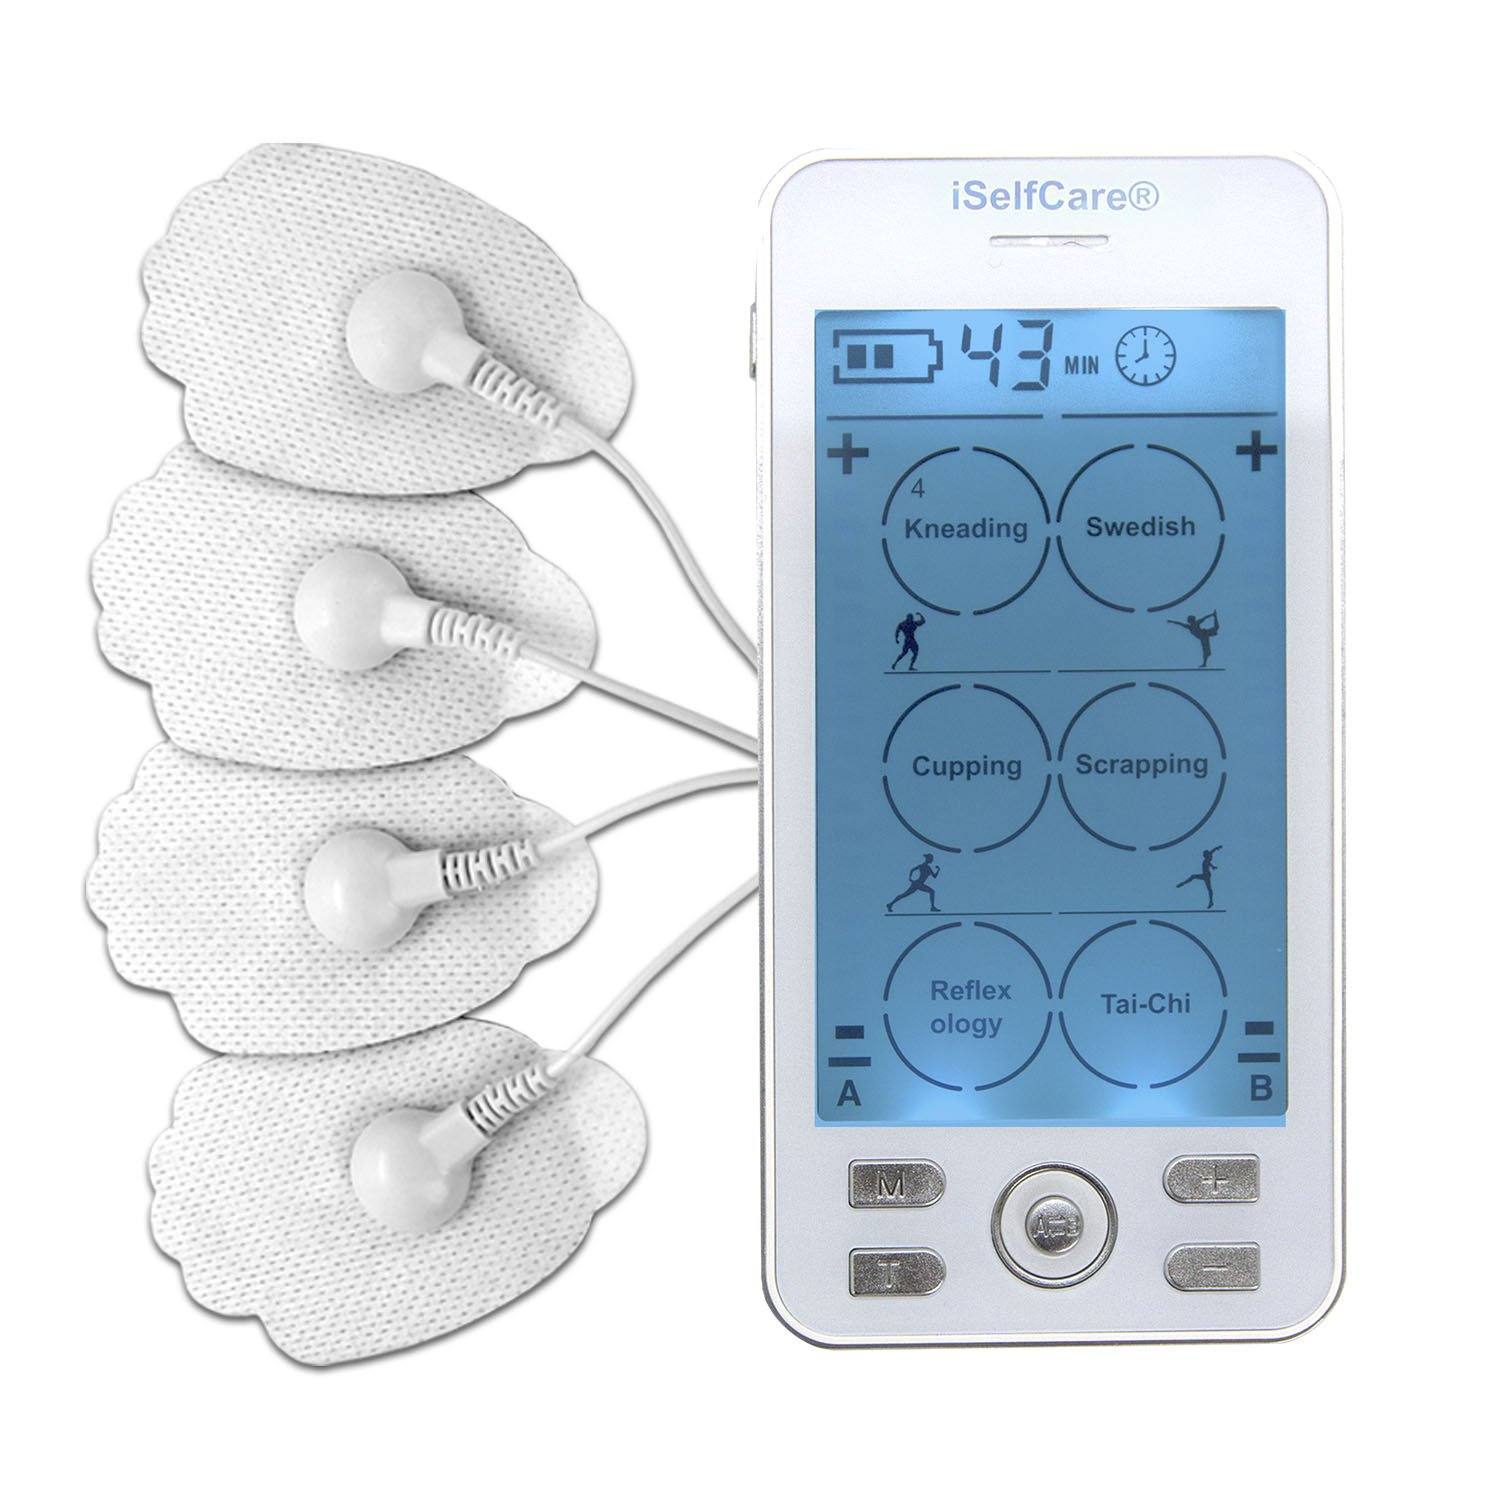 11 Interesting Uses of TENS Units for Pain Relief & More - SelfDecode Health